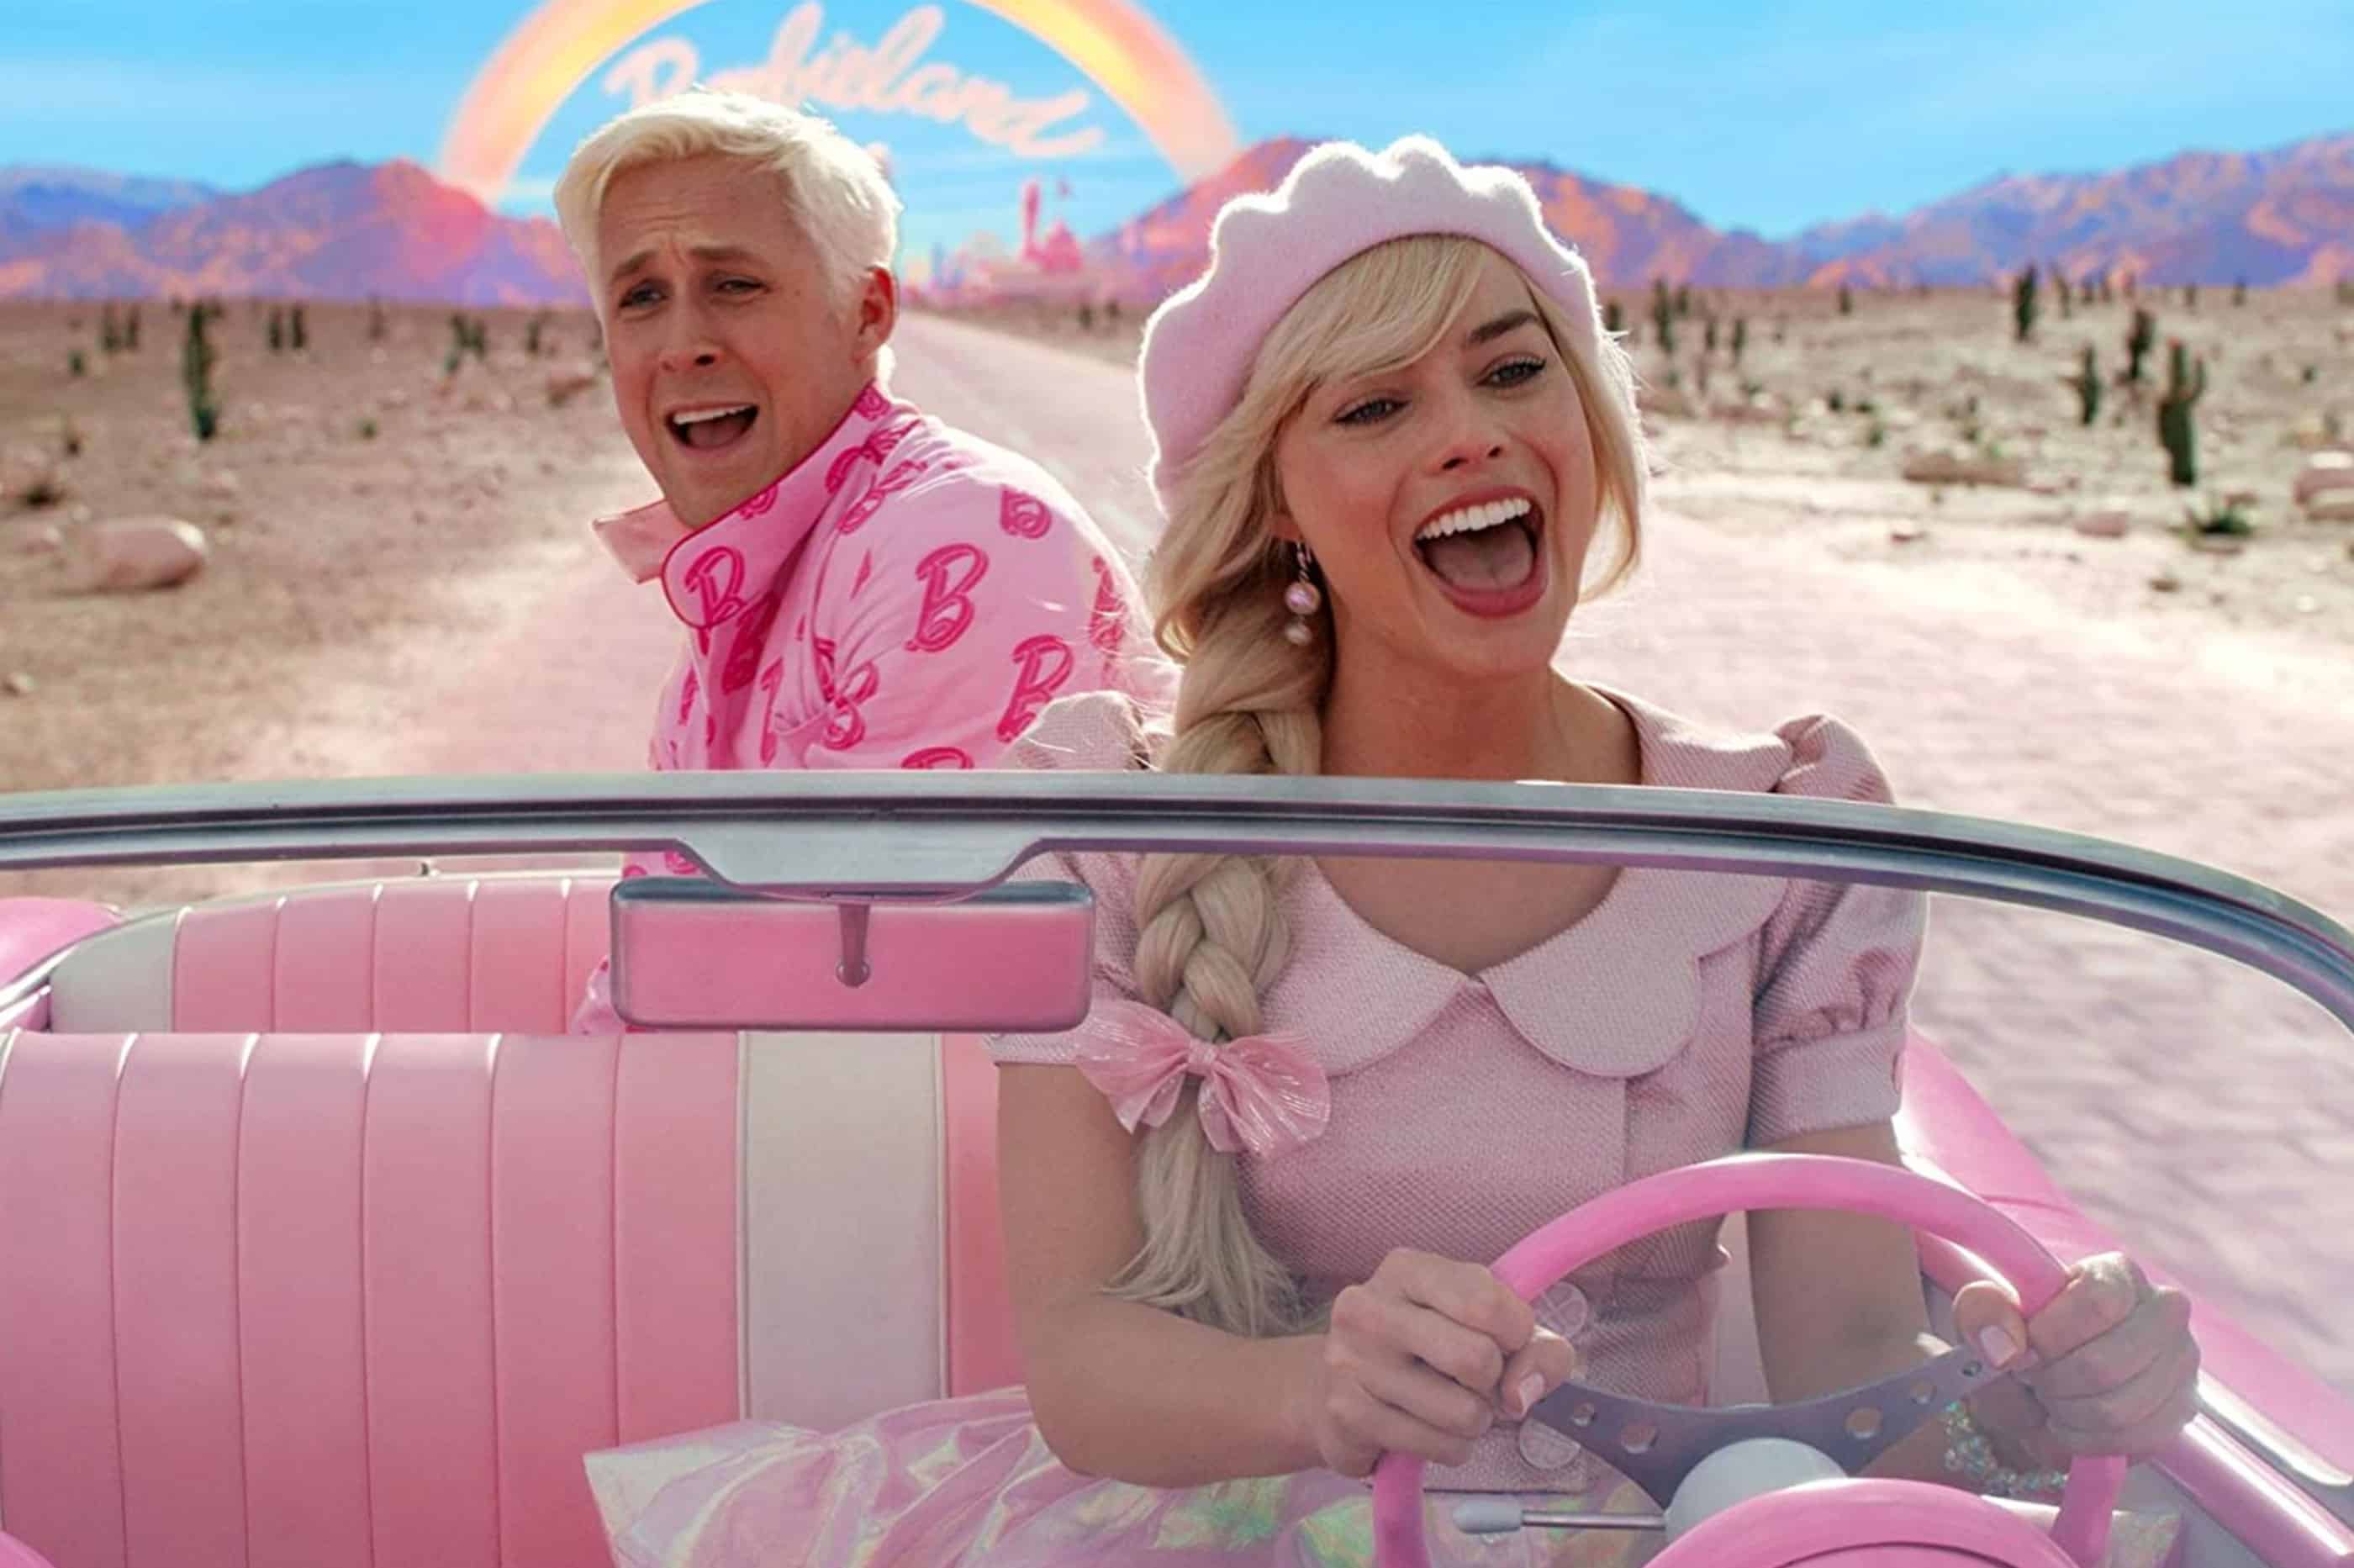 Watch the latest trailer for the upcoming 'Barbie' film, starring Margot Robbie.